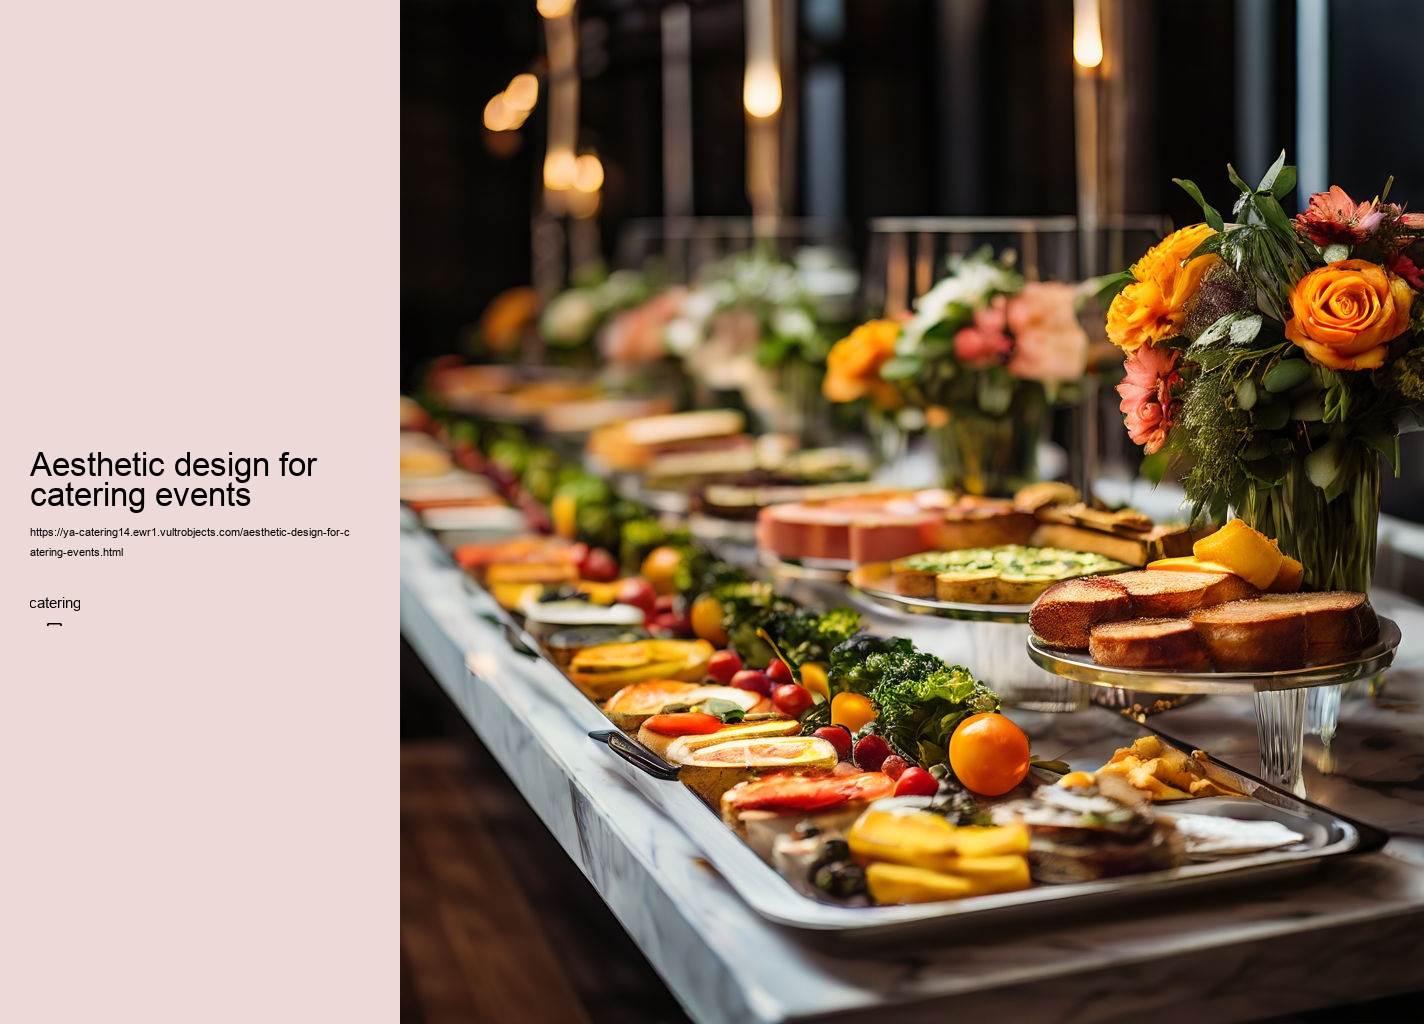 Aesthetic design for catering events